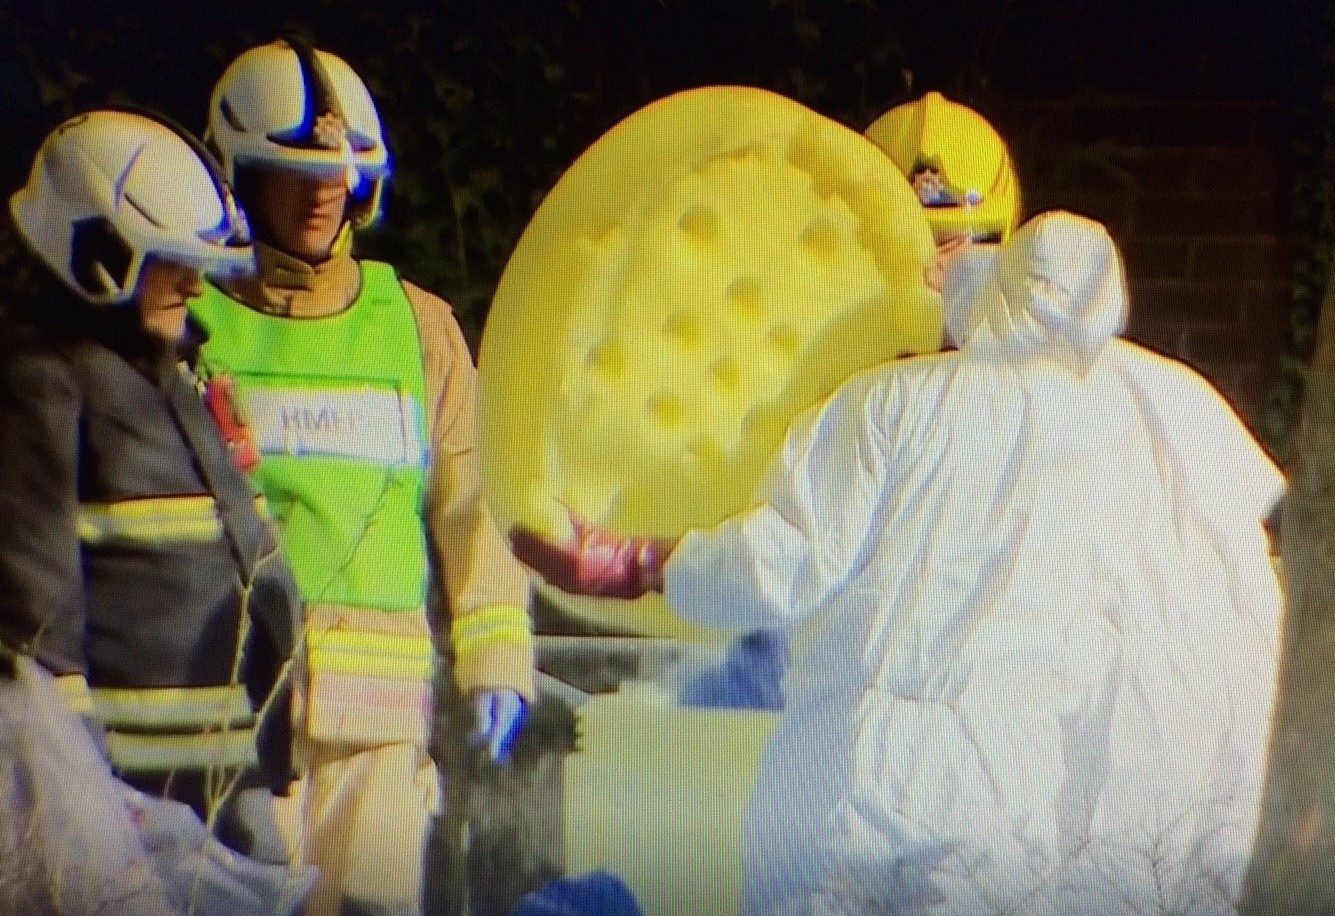 People cleaning up after Salisbury poison attack.